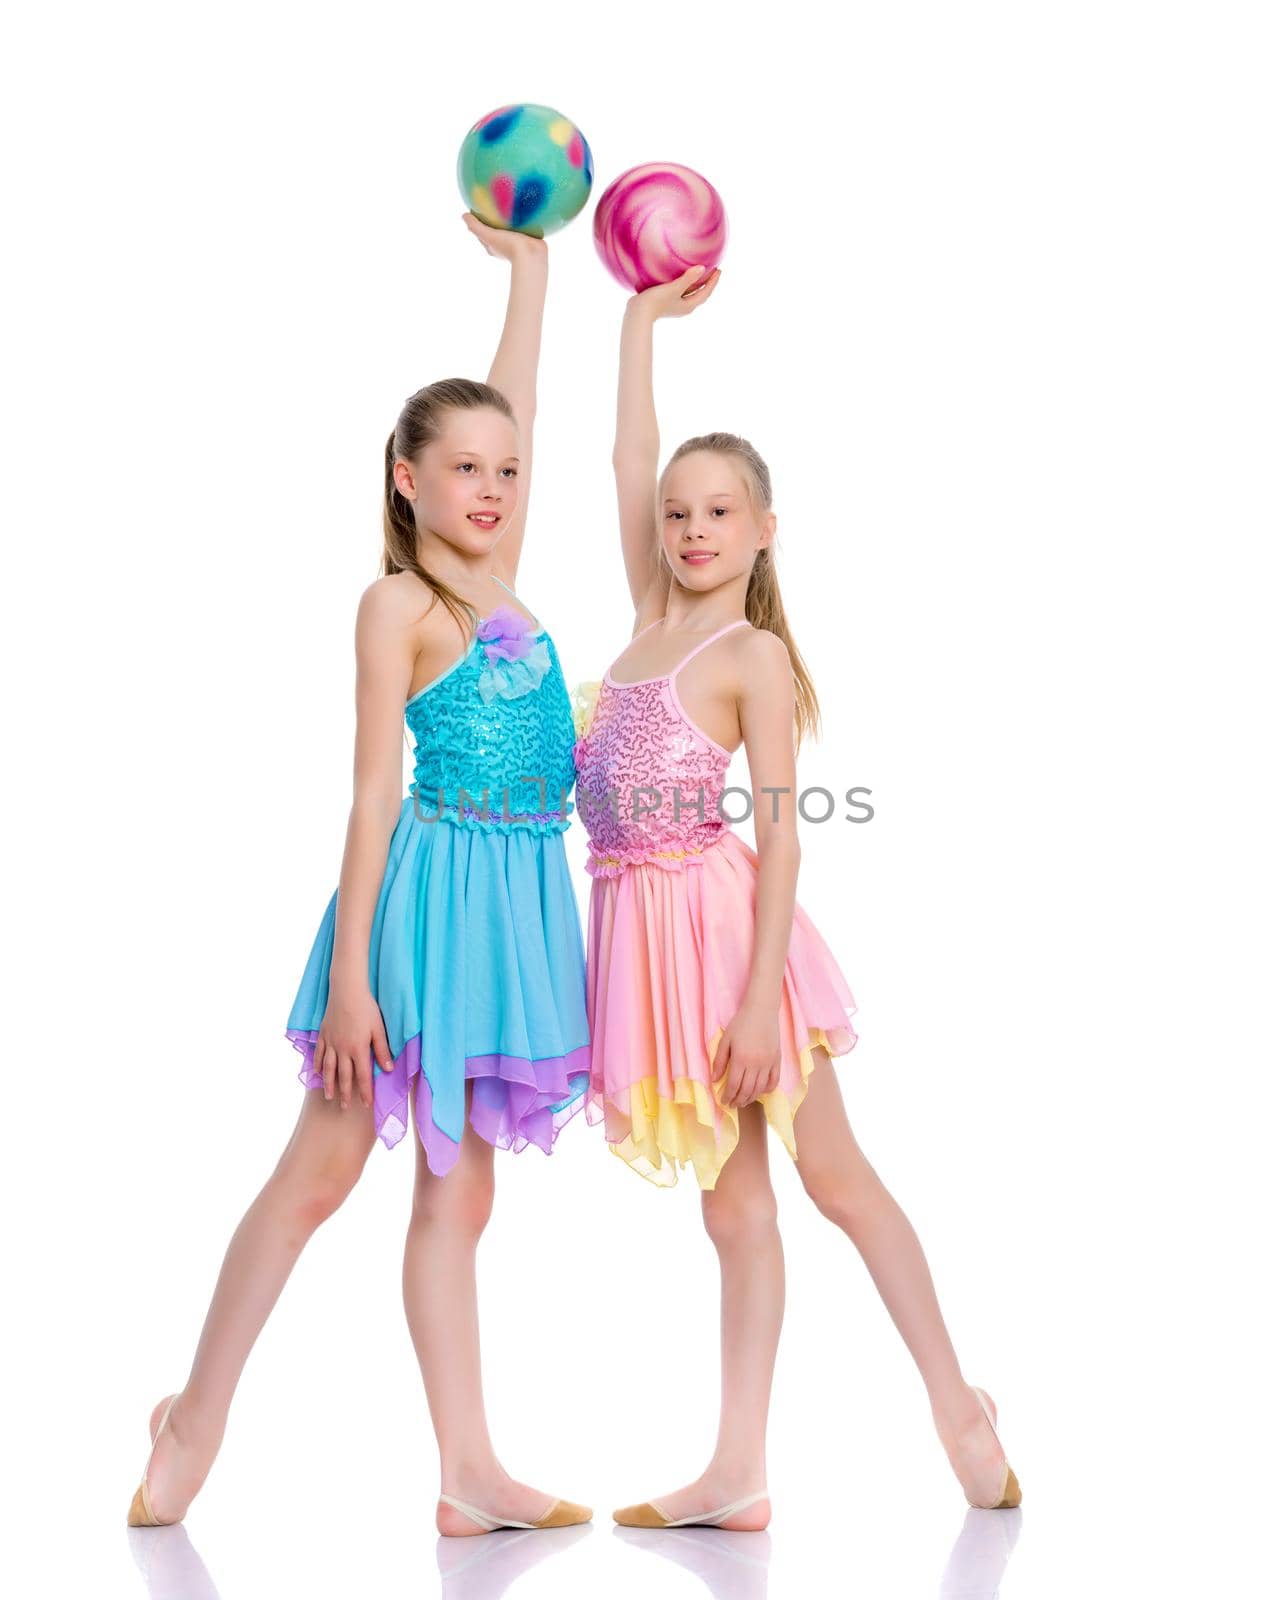 Two cheerful little girls gymnasts in competitions, perform exercises with the ball. The concept of children's sports, fitness, healthy lifestyle. Isolated on white background.